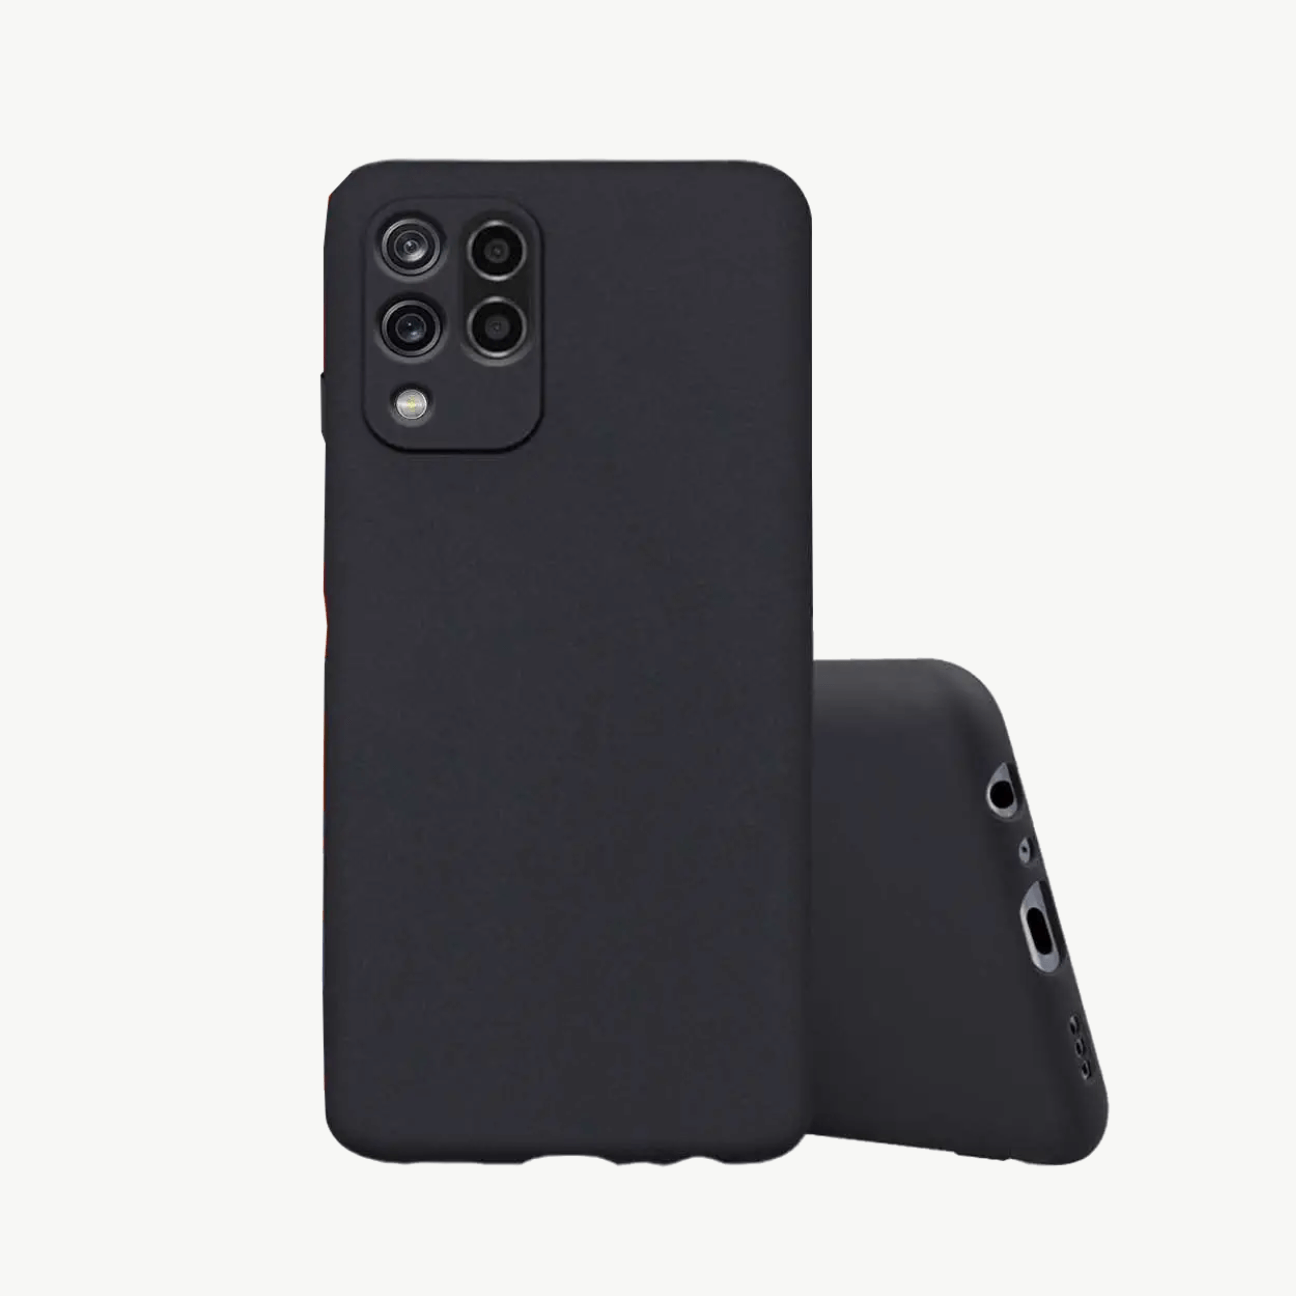 iPhone XS MAX Black Soft Silicone Phone Case